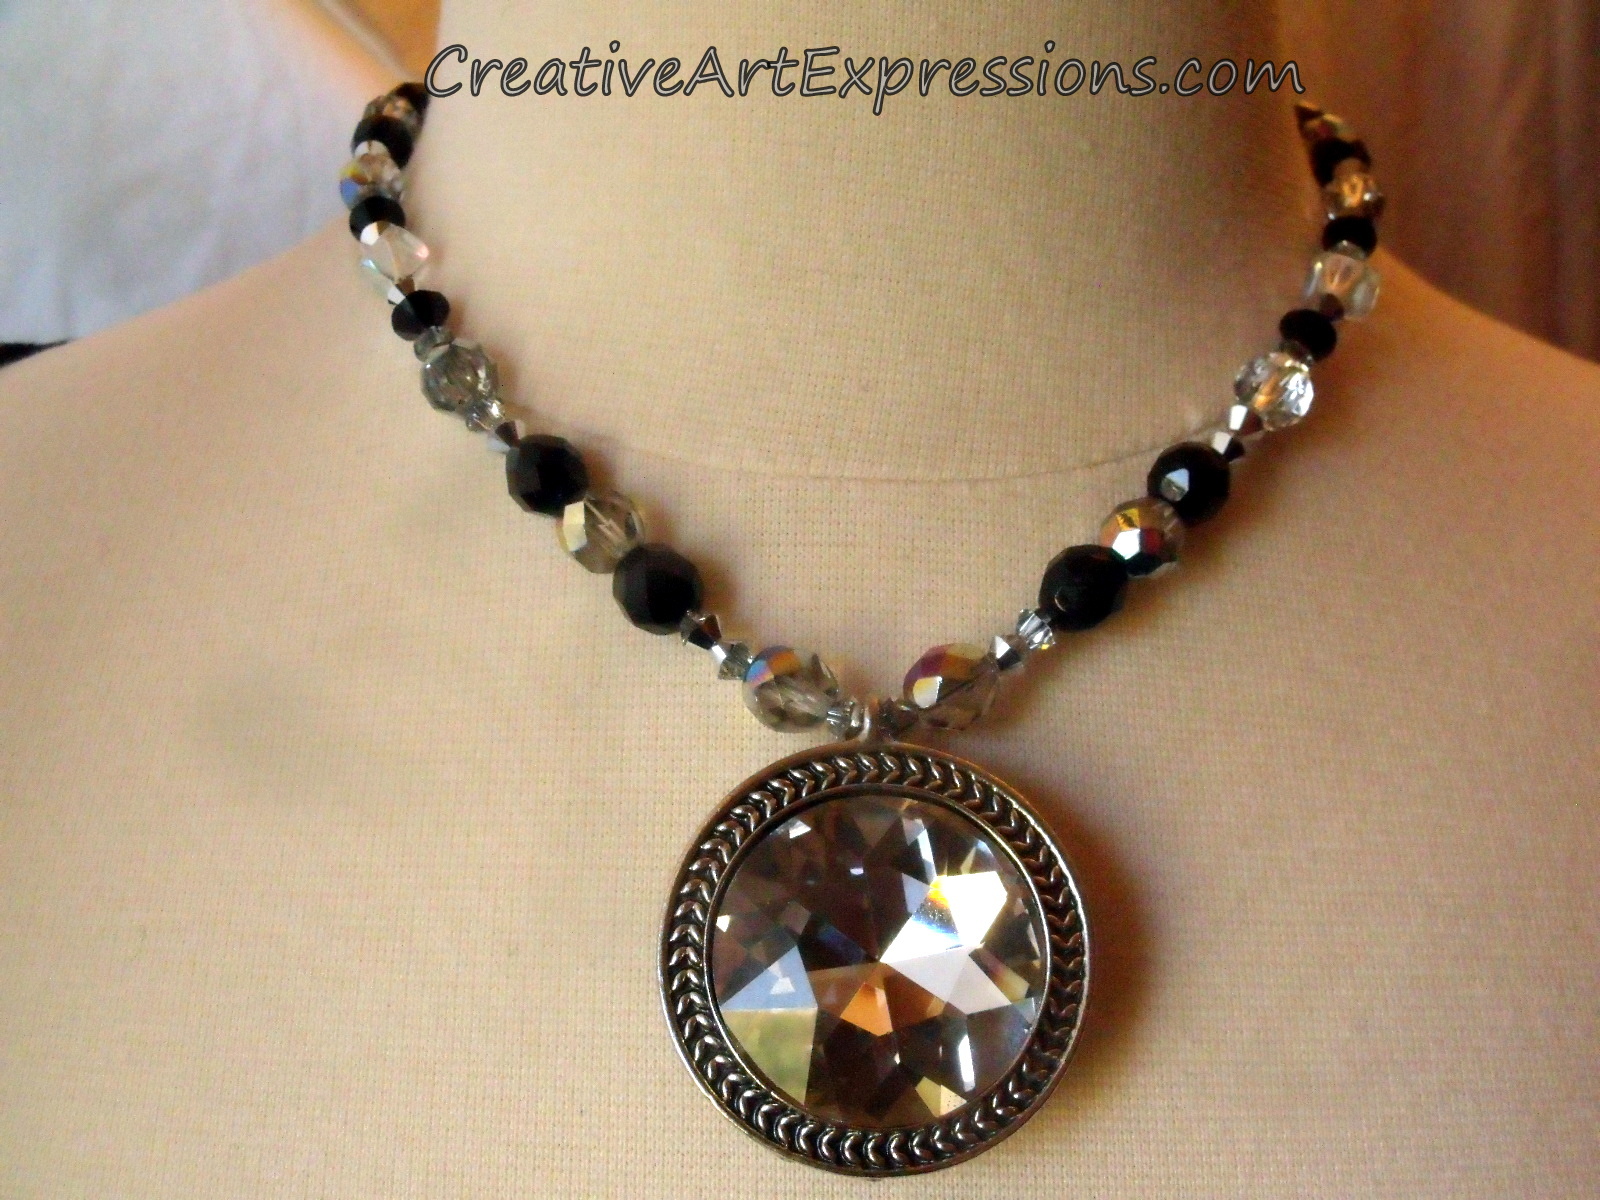 Creative Art Expressions Handmade Black & Crystal Necklace Jewelry Design